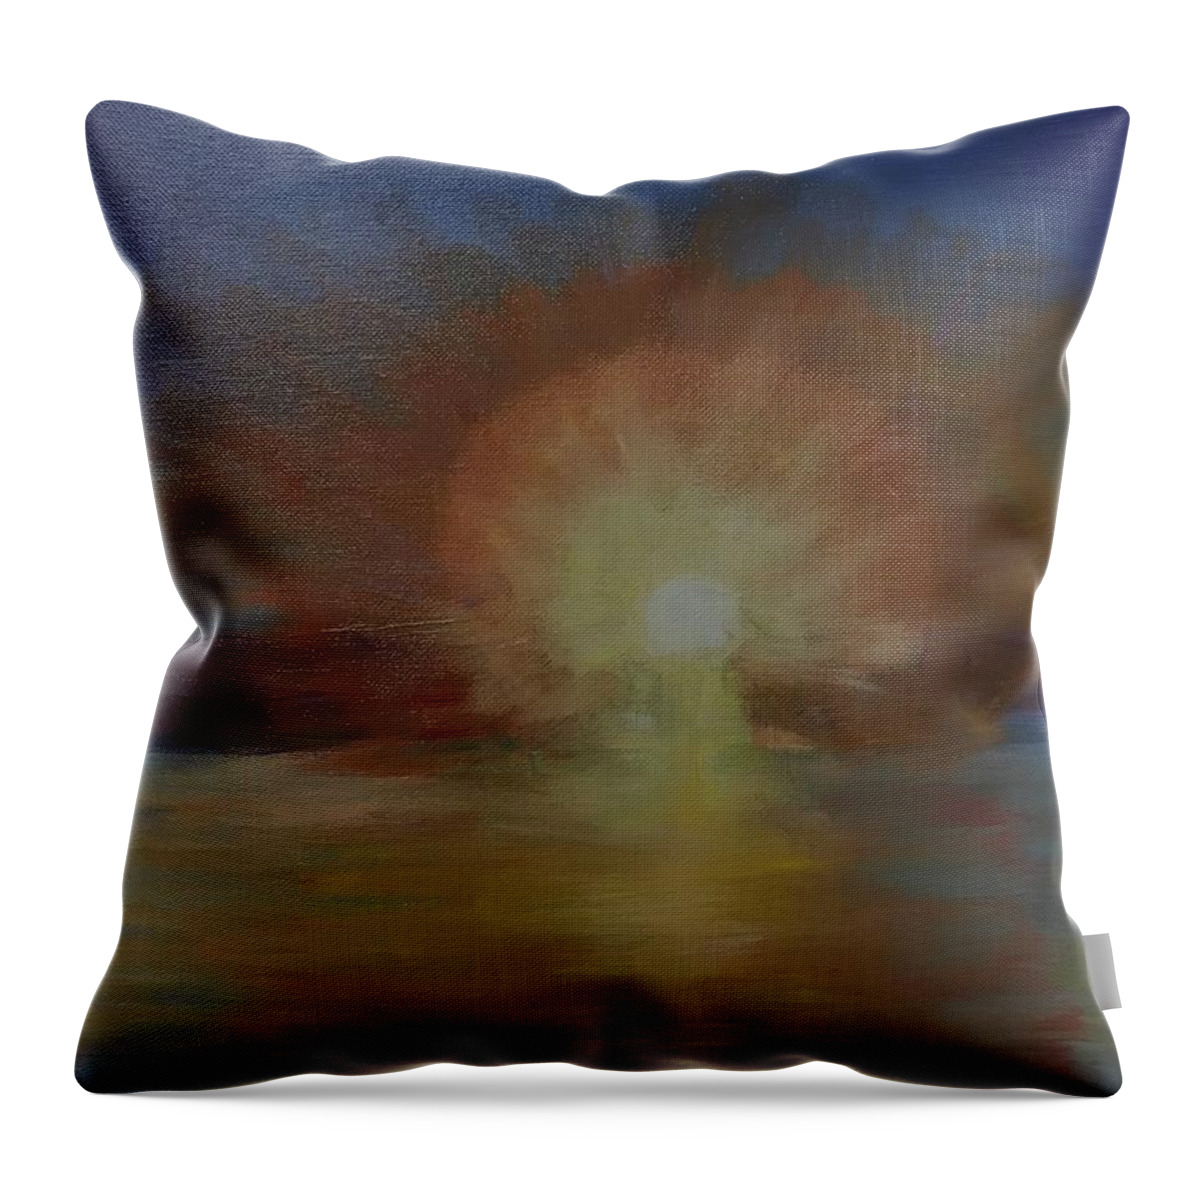 Sun Rise Throw Pillow featuring the painting Pre Sun Rise by Terry Frederick